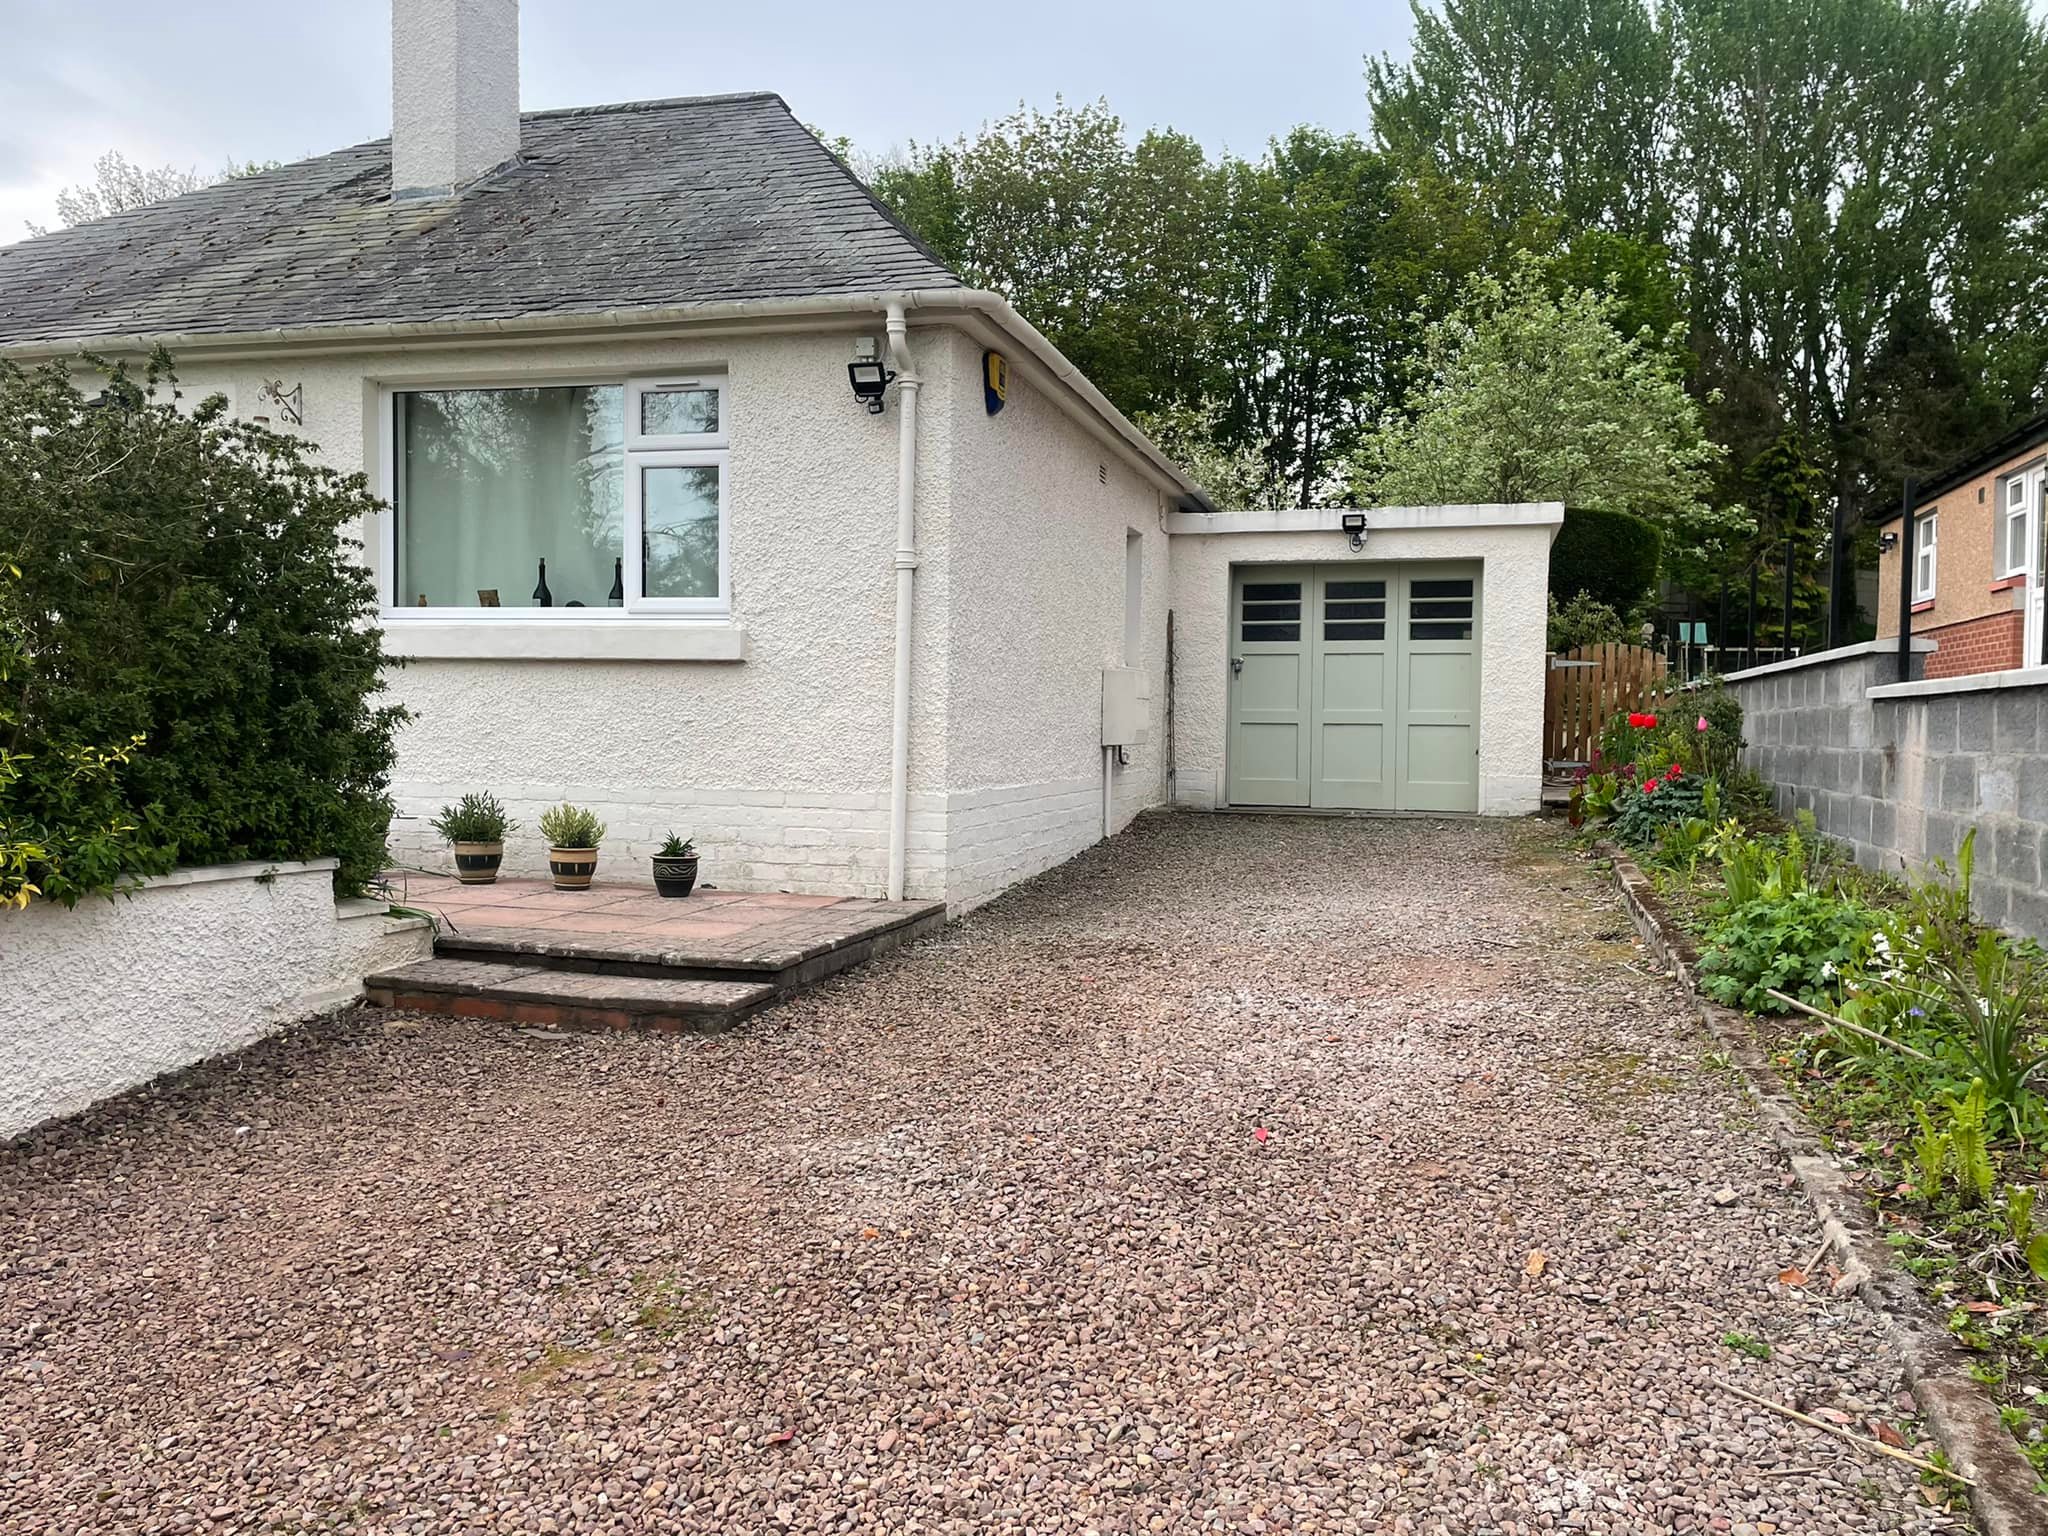 Upgrade Chipped Driveway for Bungalow